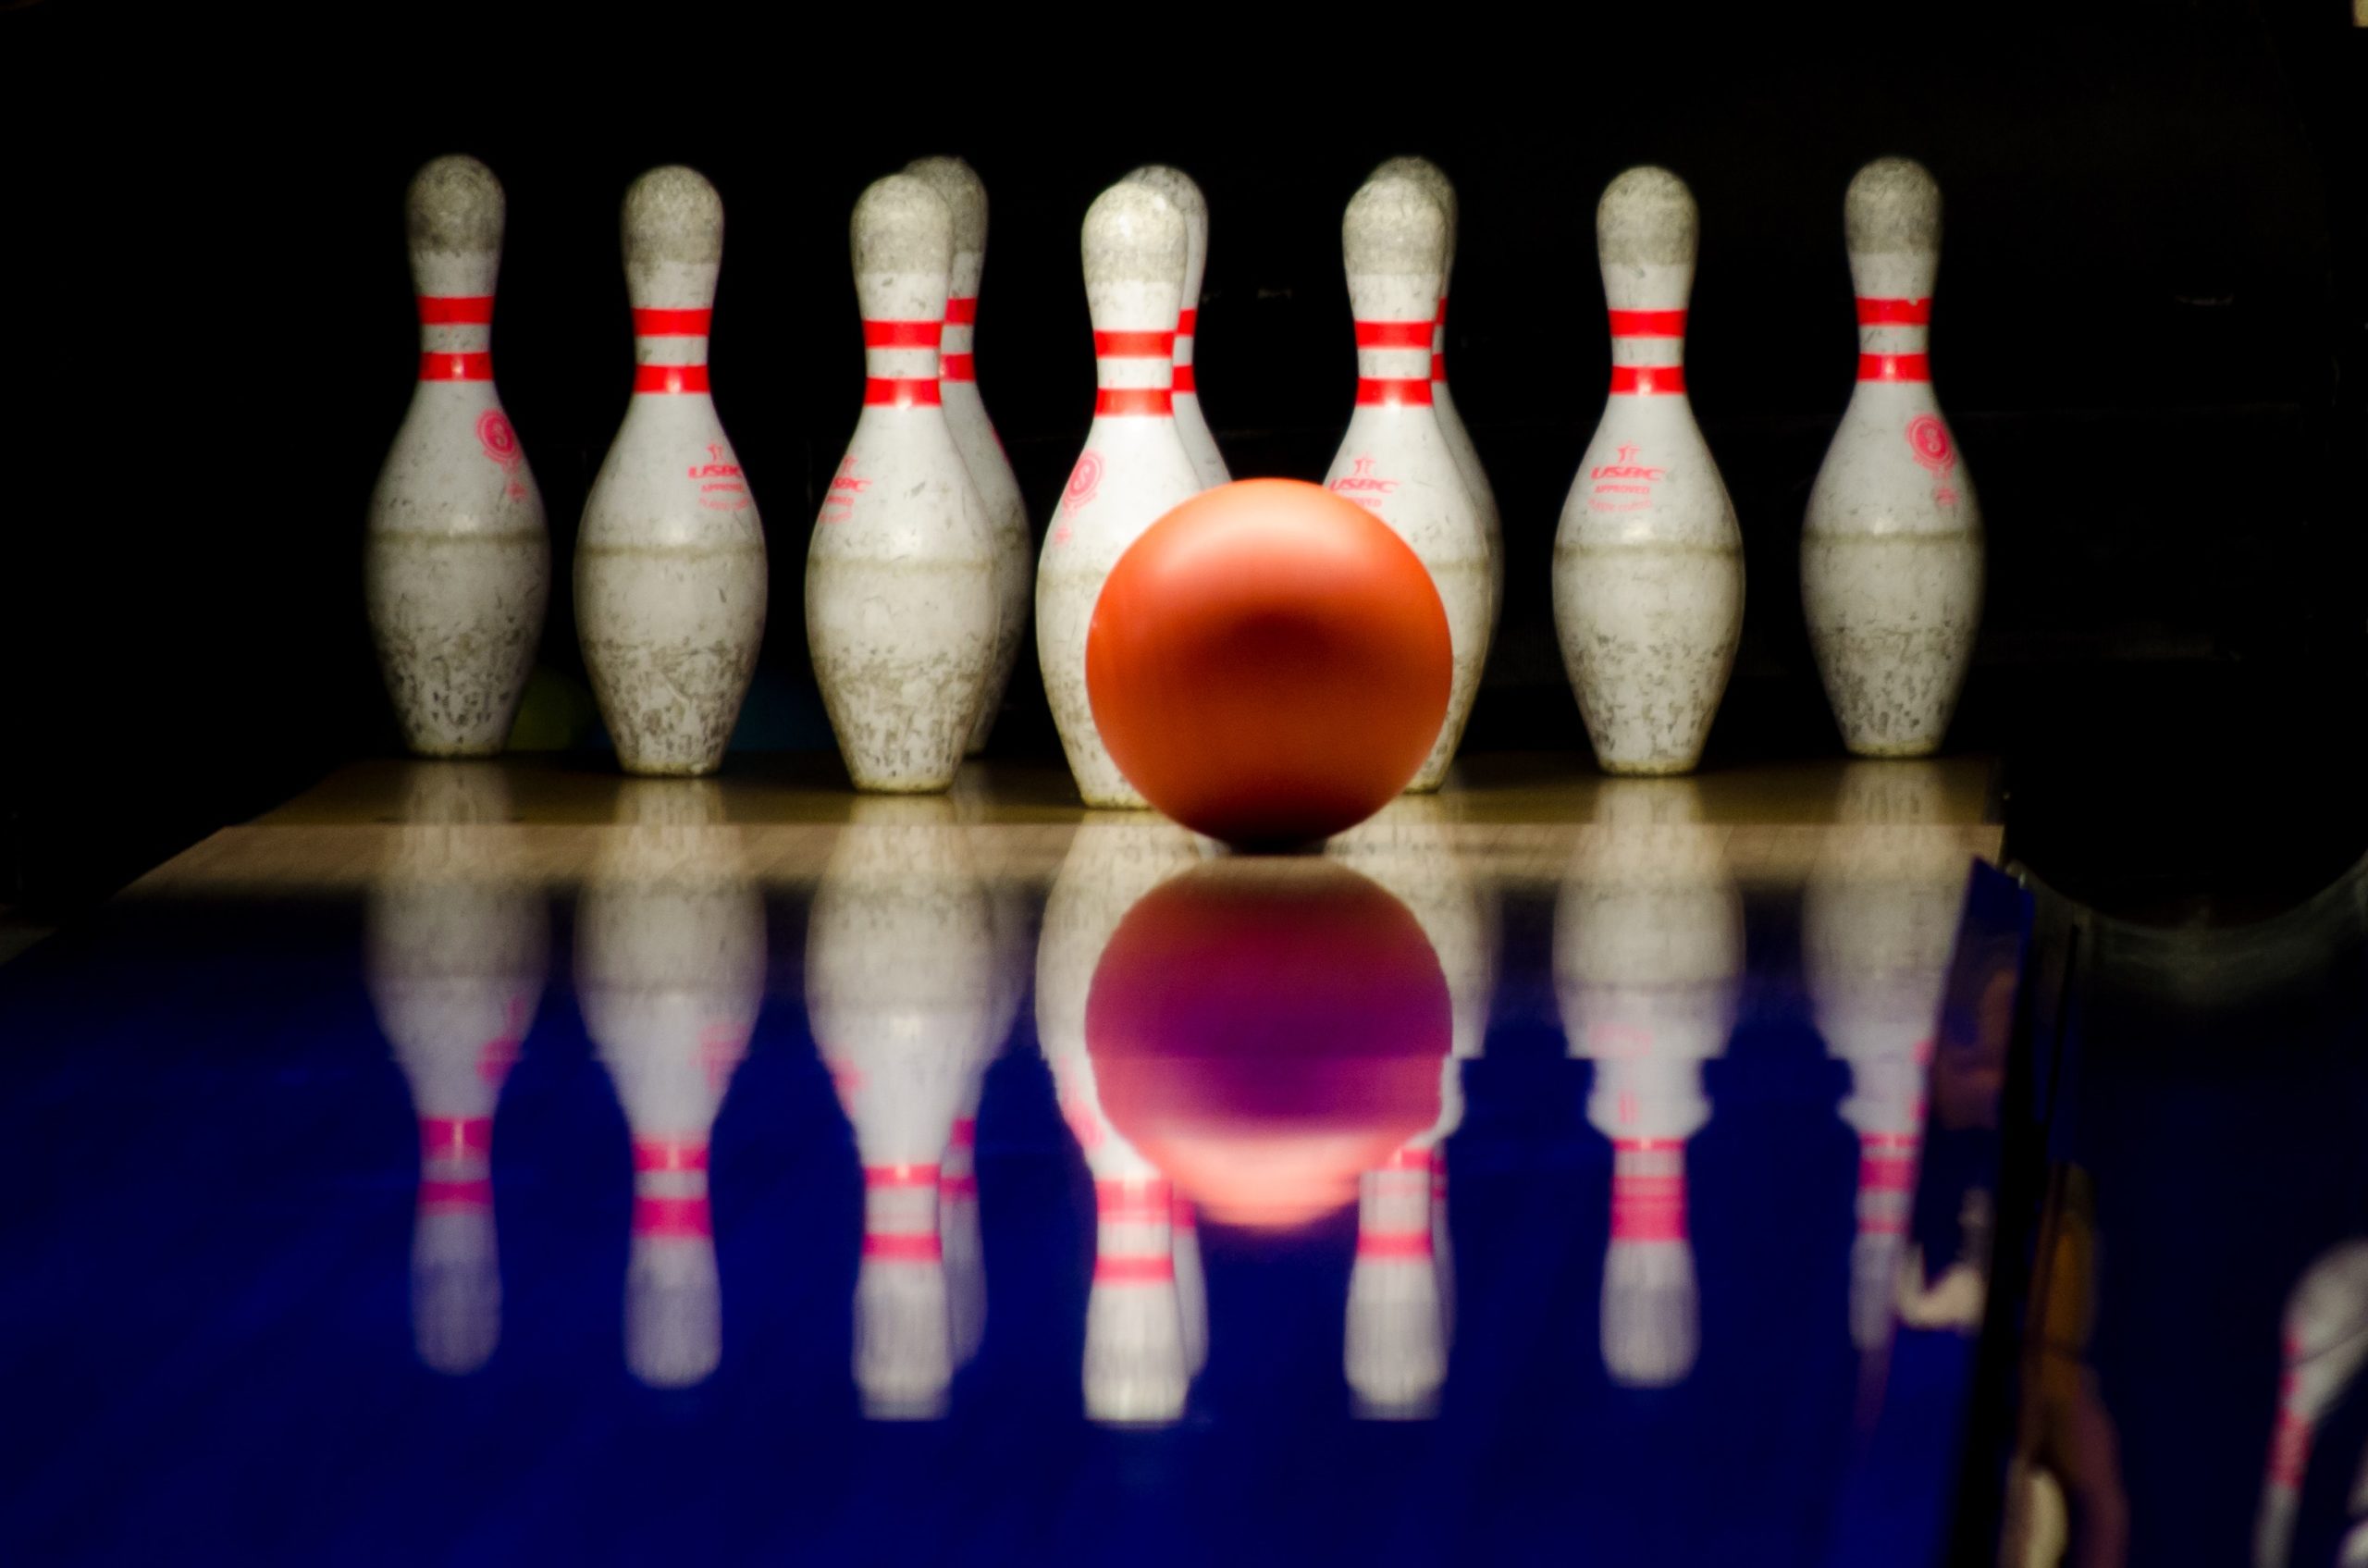 A closeup shot of a bowling alley lane with a ball rolling towards the pins